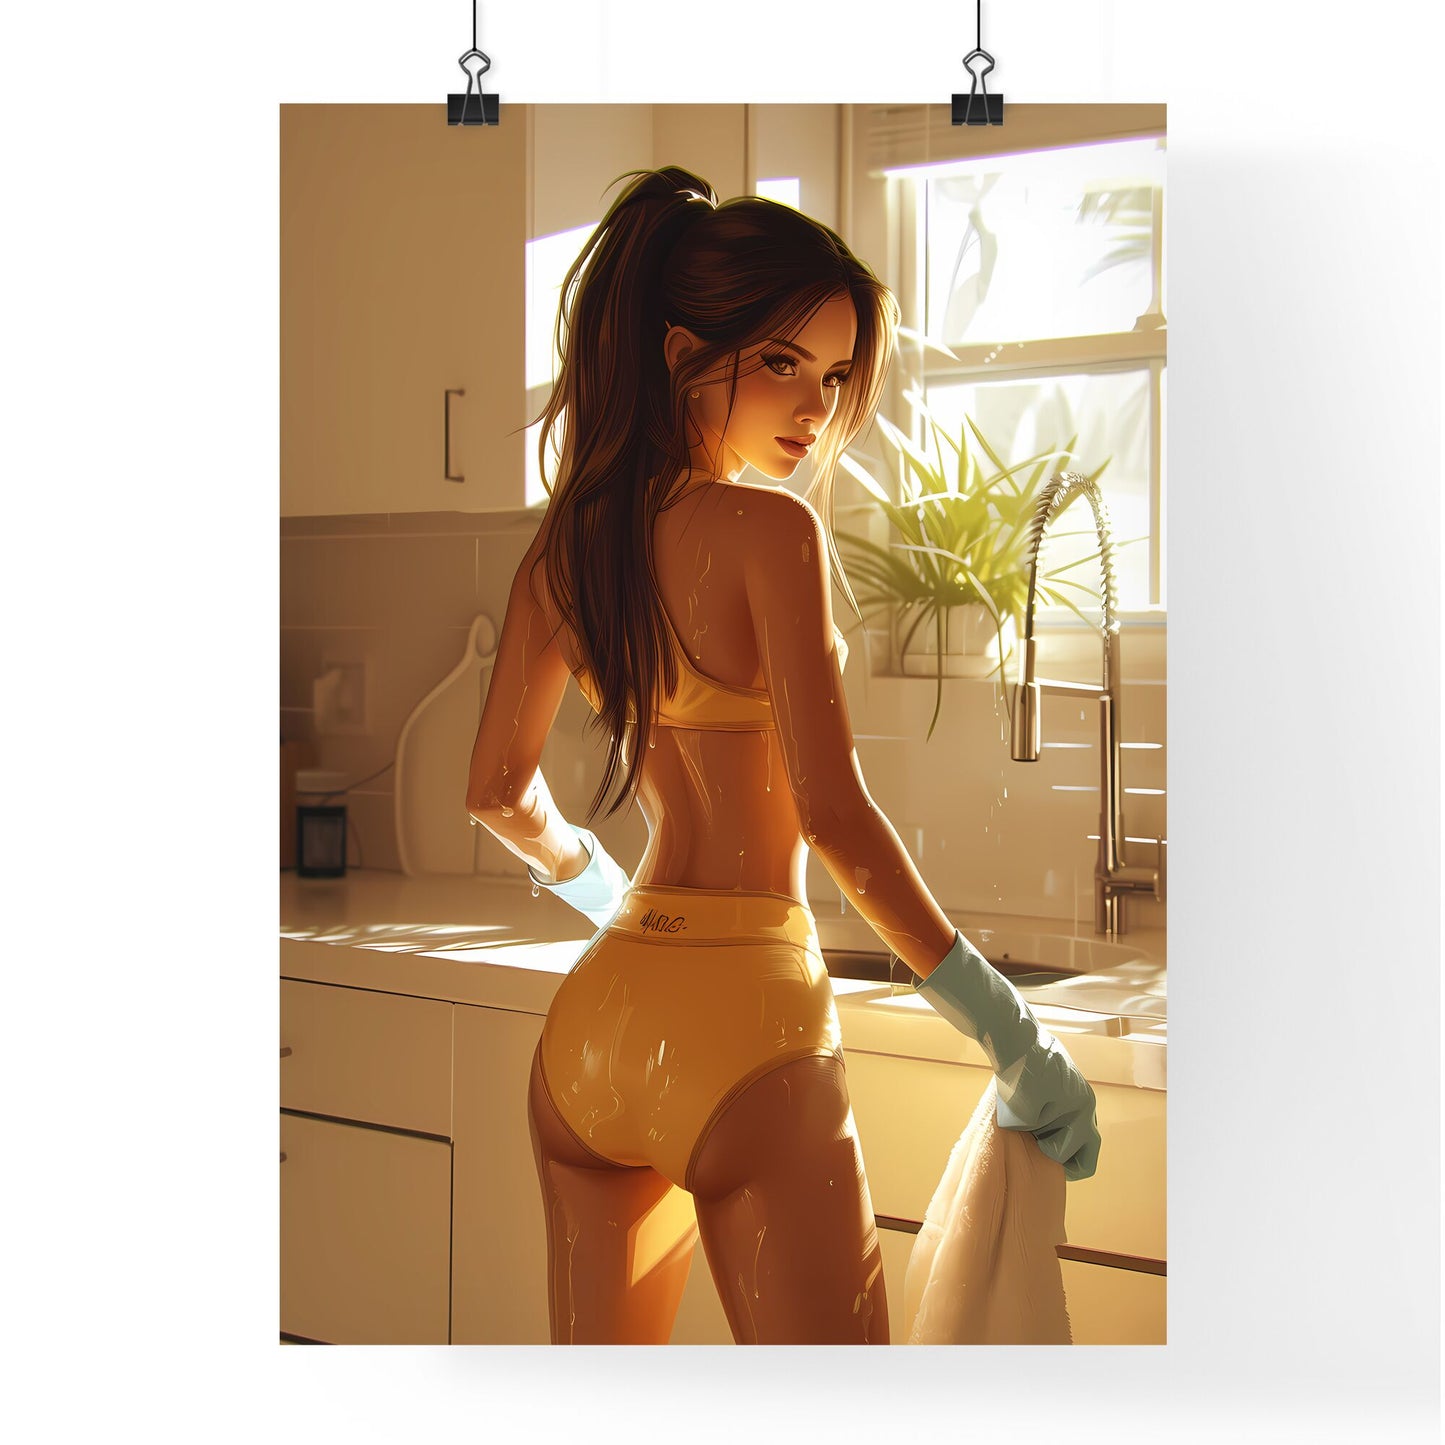 A housewife in a beautiful outfit is cleaning and she is happy, her face is very beautiful - Art print of a woman in a yellow bathing suit Default Title